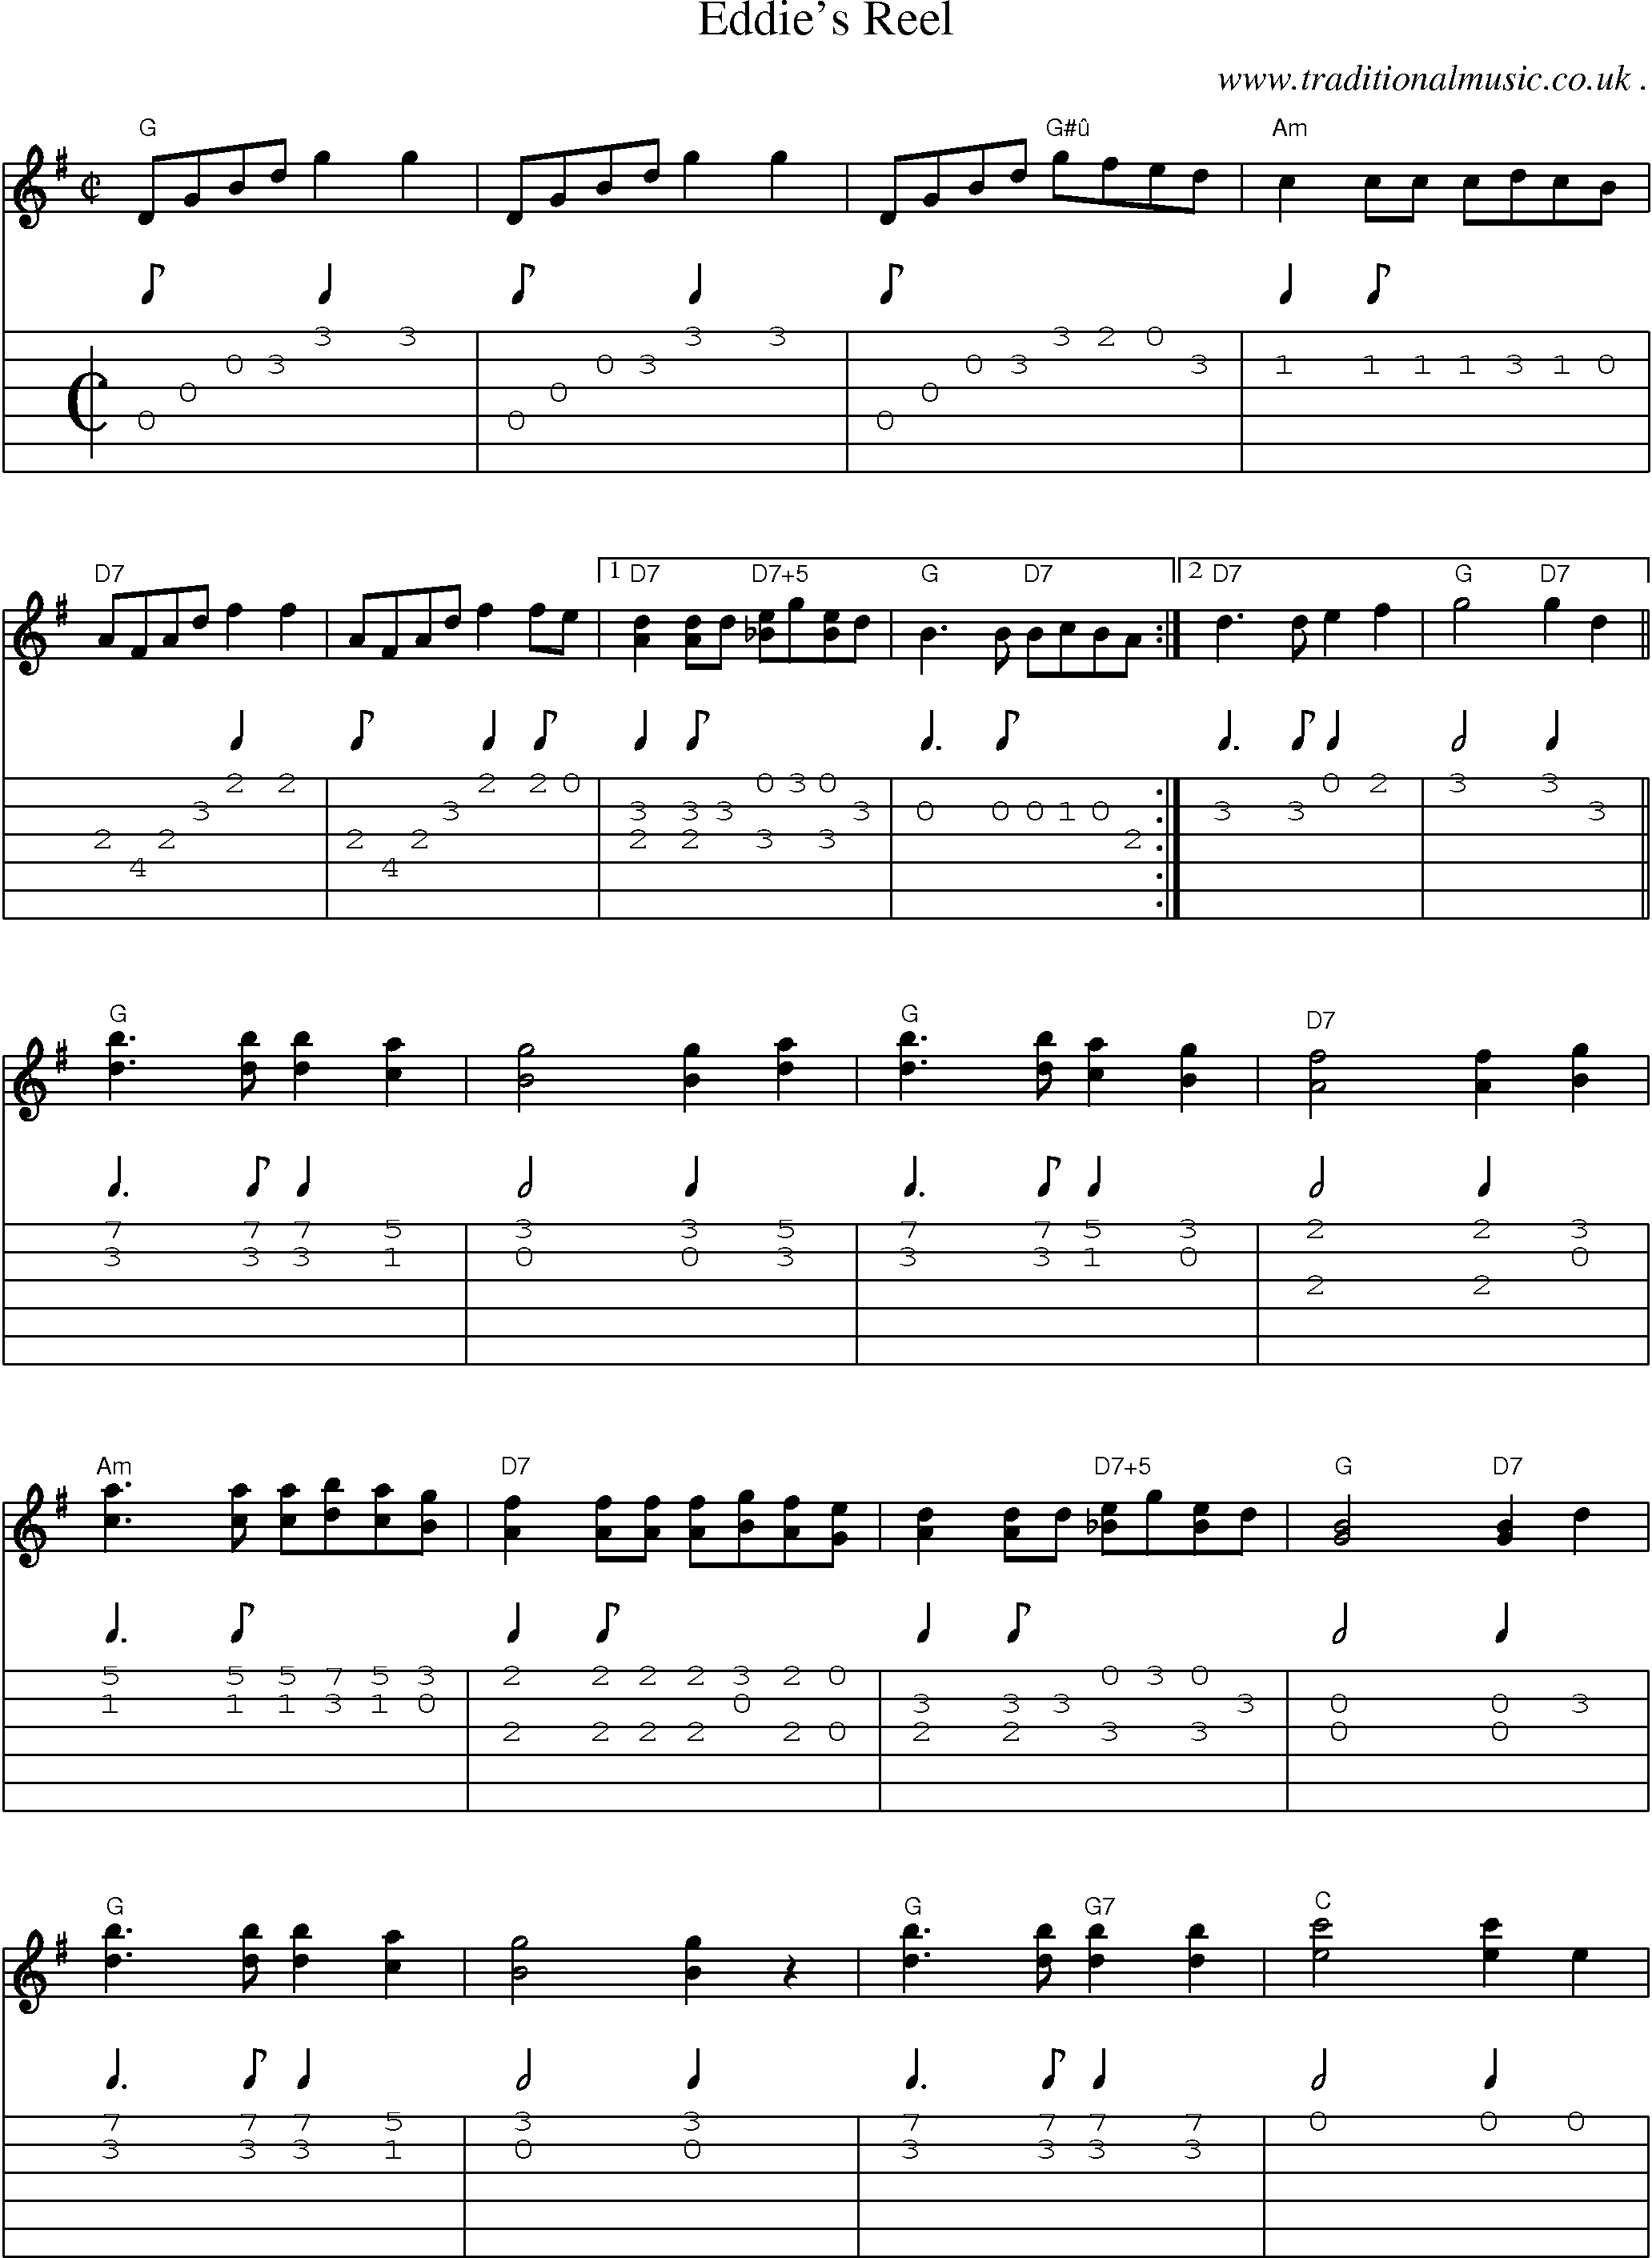 Music Score and Guitar Tabs for Eddies Reel